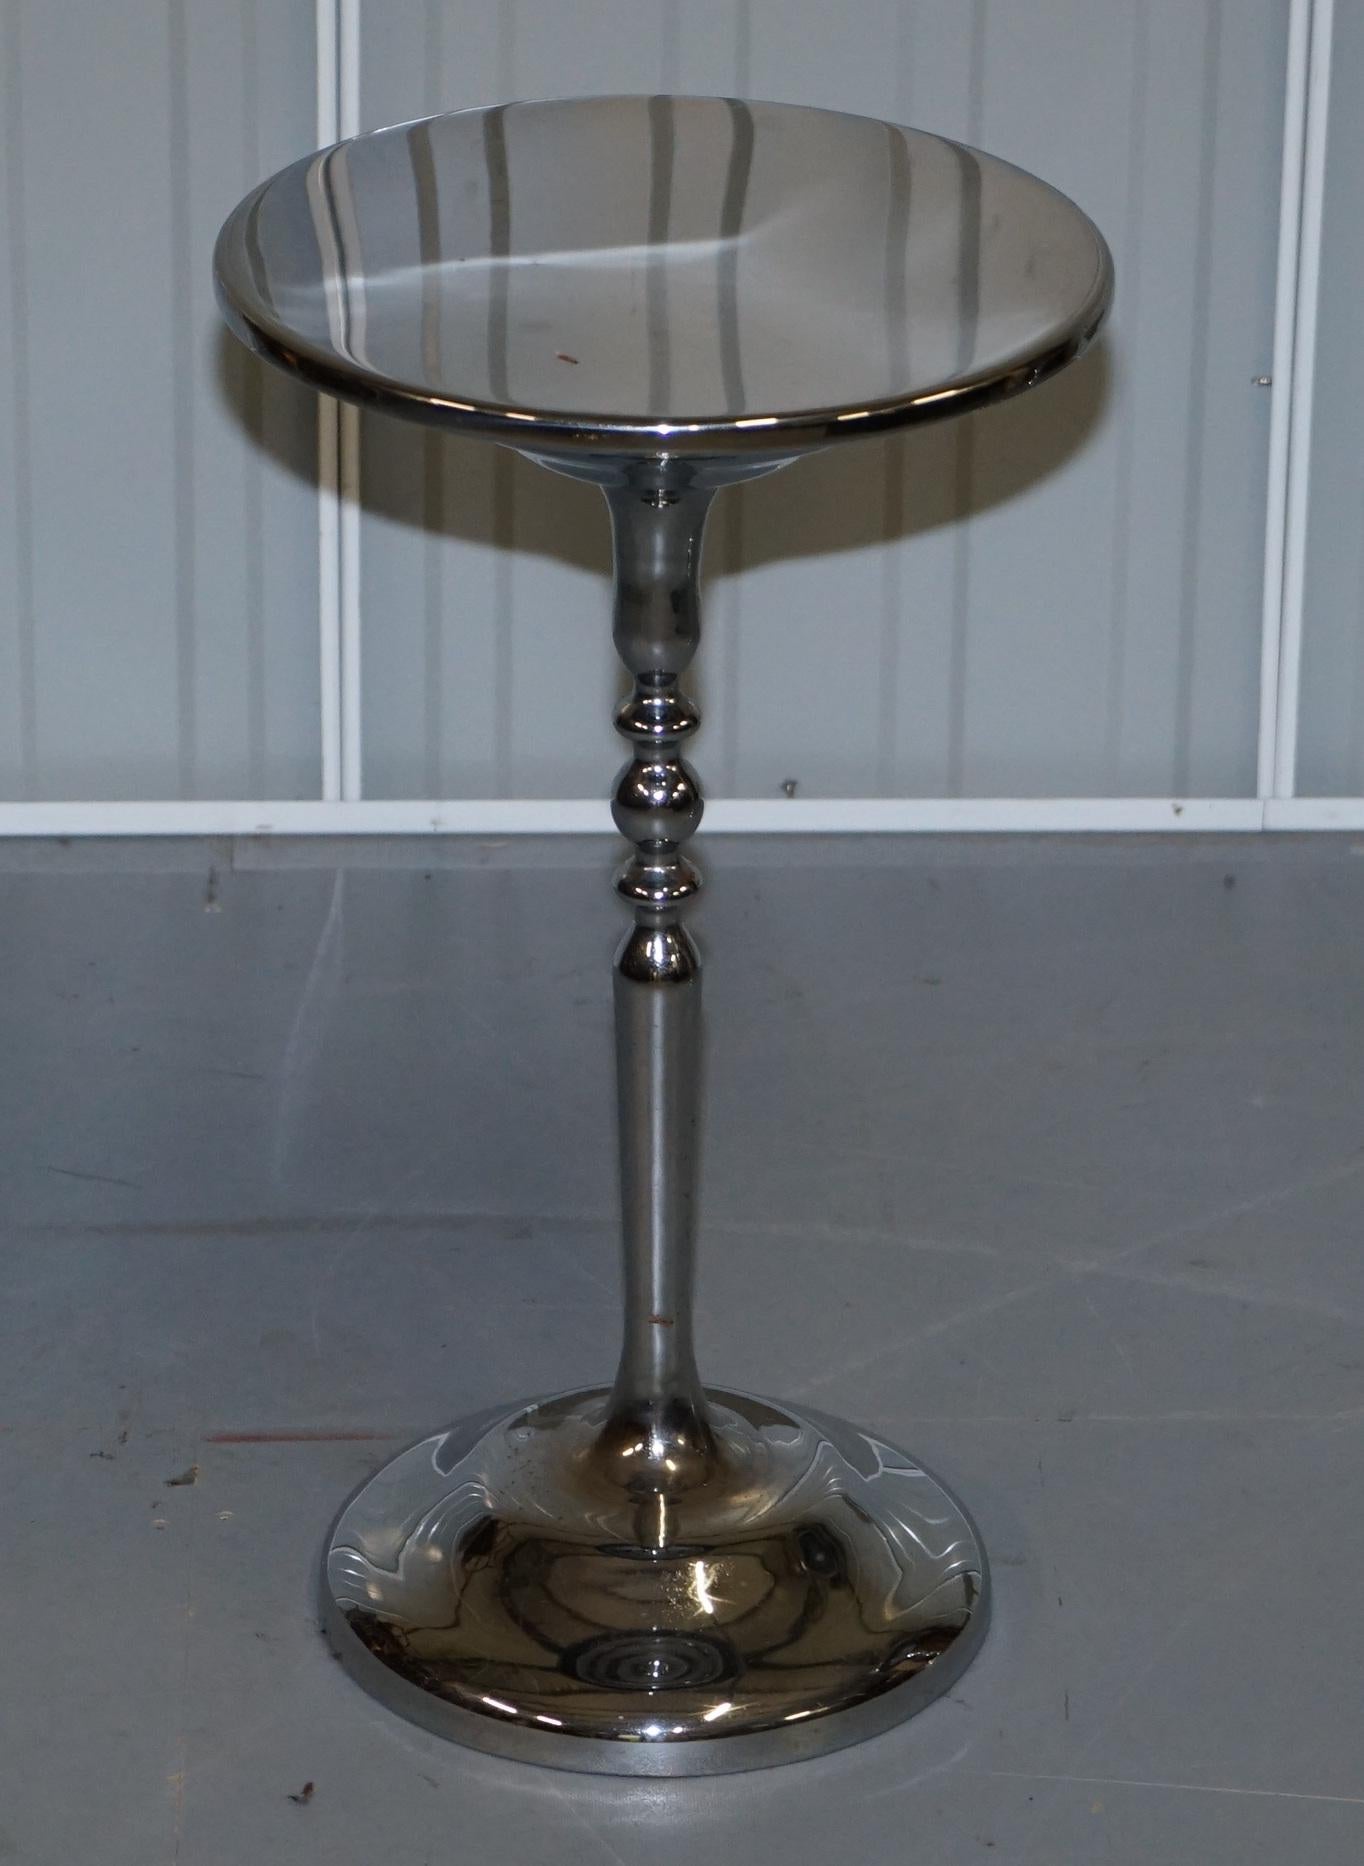 We are delighted to offer for sale this lovely pair of vintage chrome-plated large side tables part of a suite

I have a selection of these tables for sale, I have one bronze plated, a pair of chrome-plated, a pair of gold plated and one last